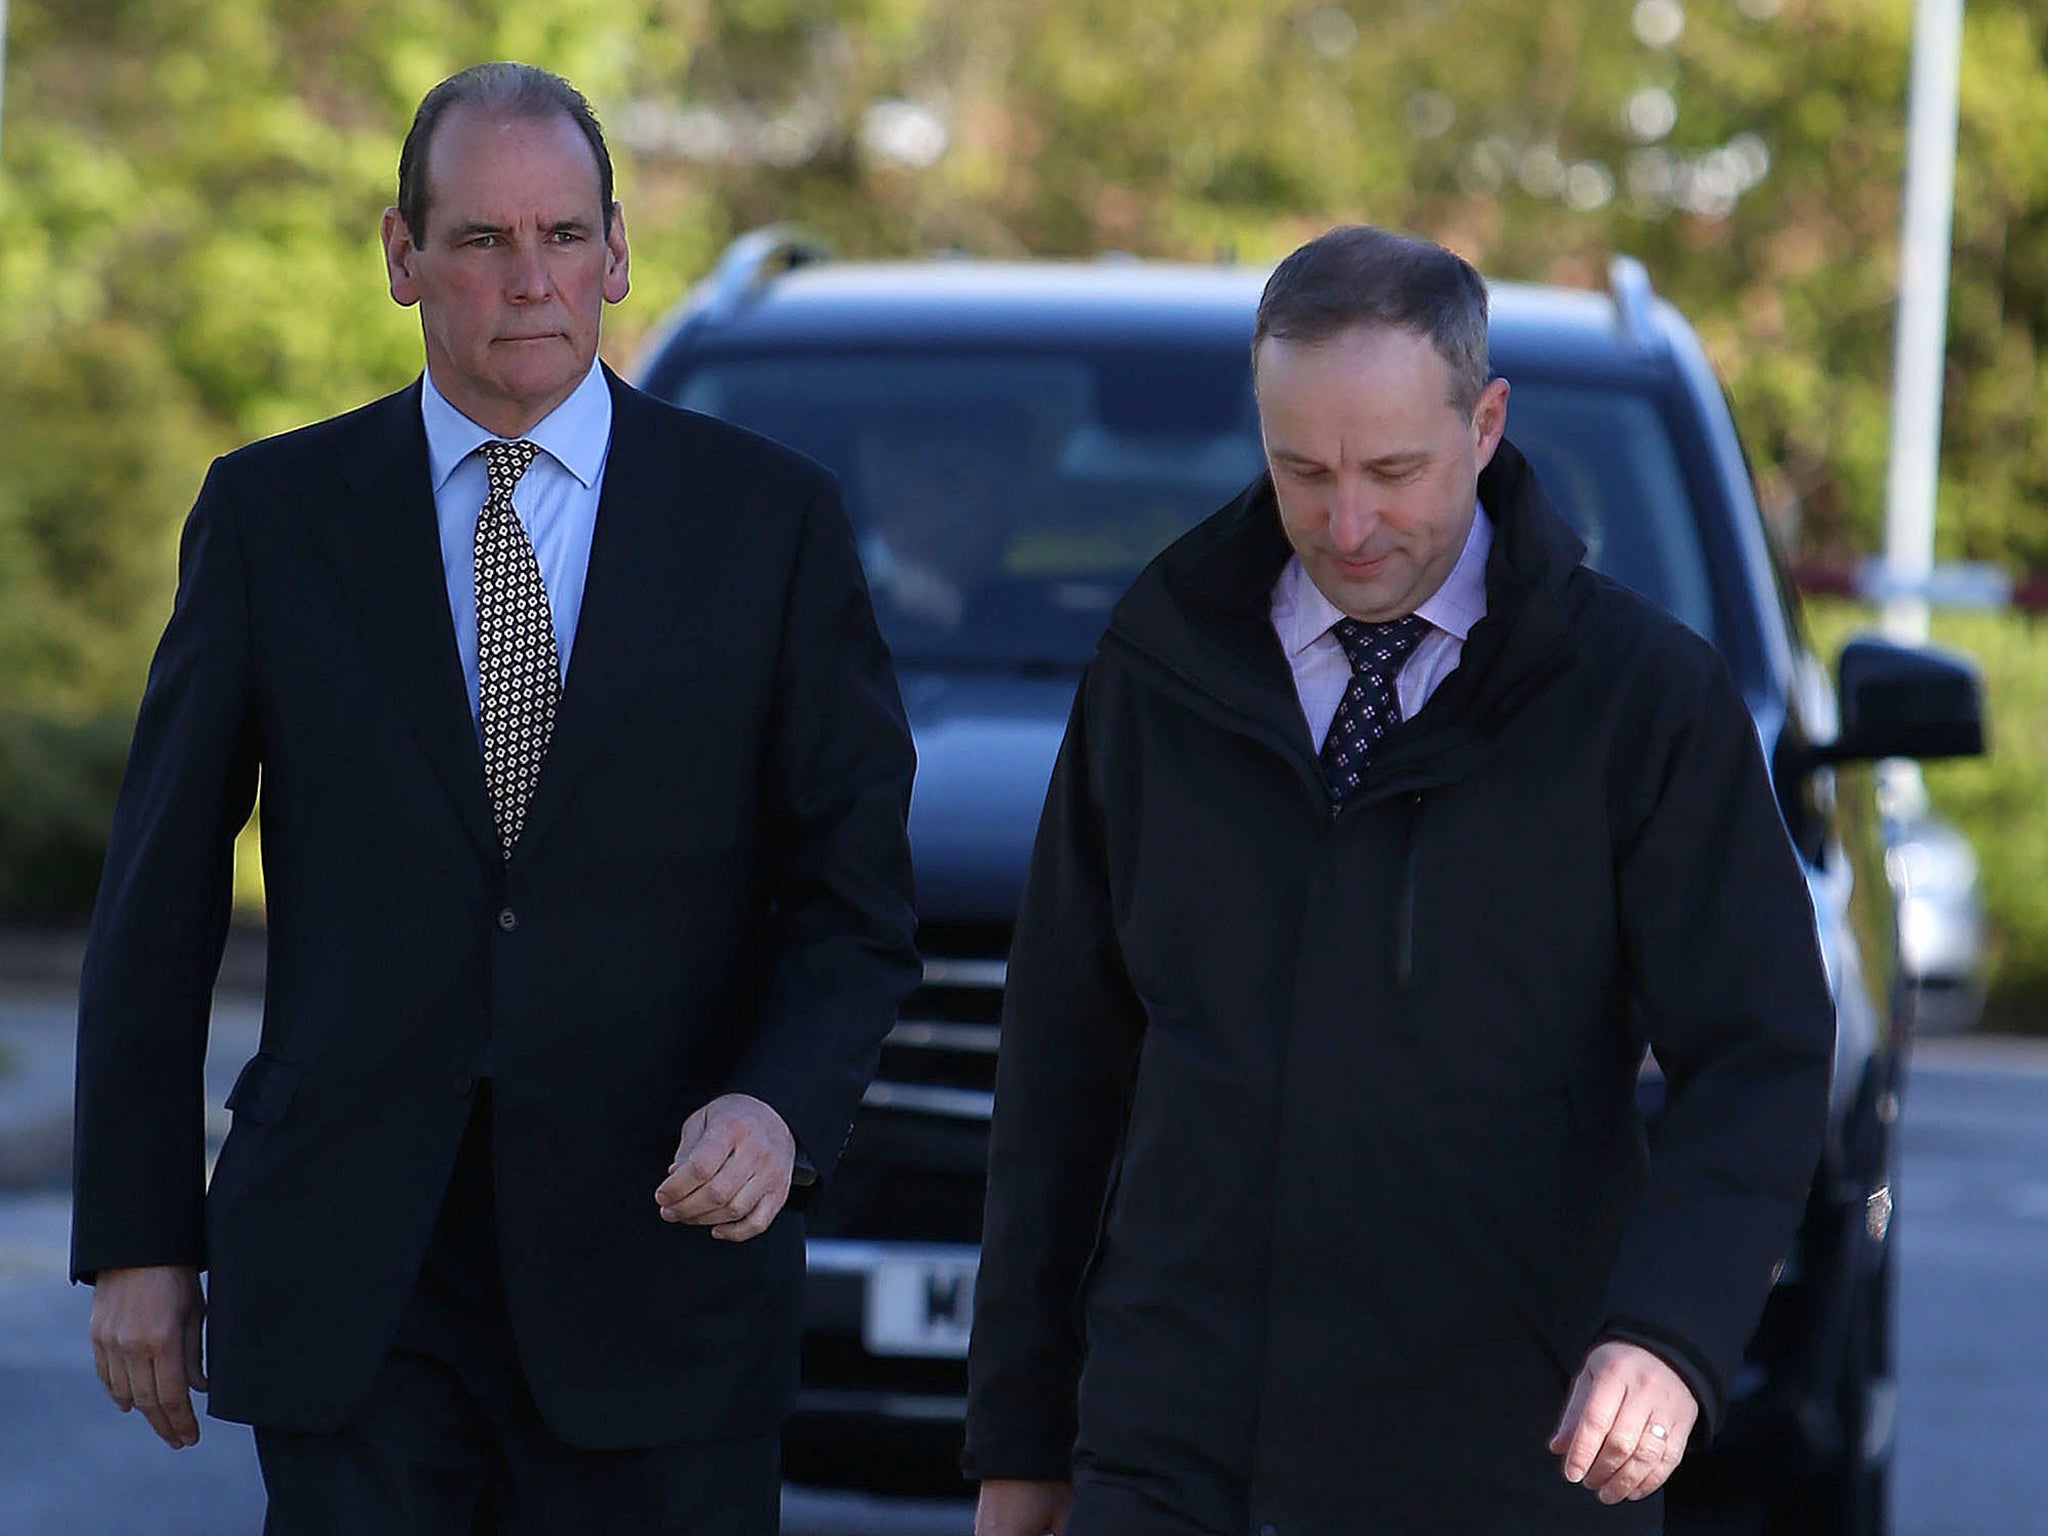 Sir Norman Bettison (left) arrives to give evidence at the inquests in Warrington
yesterday